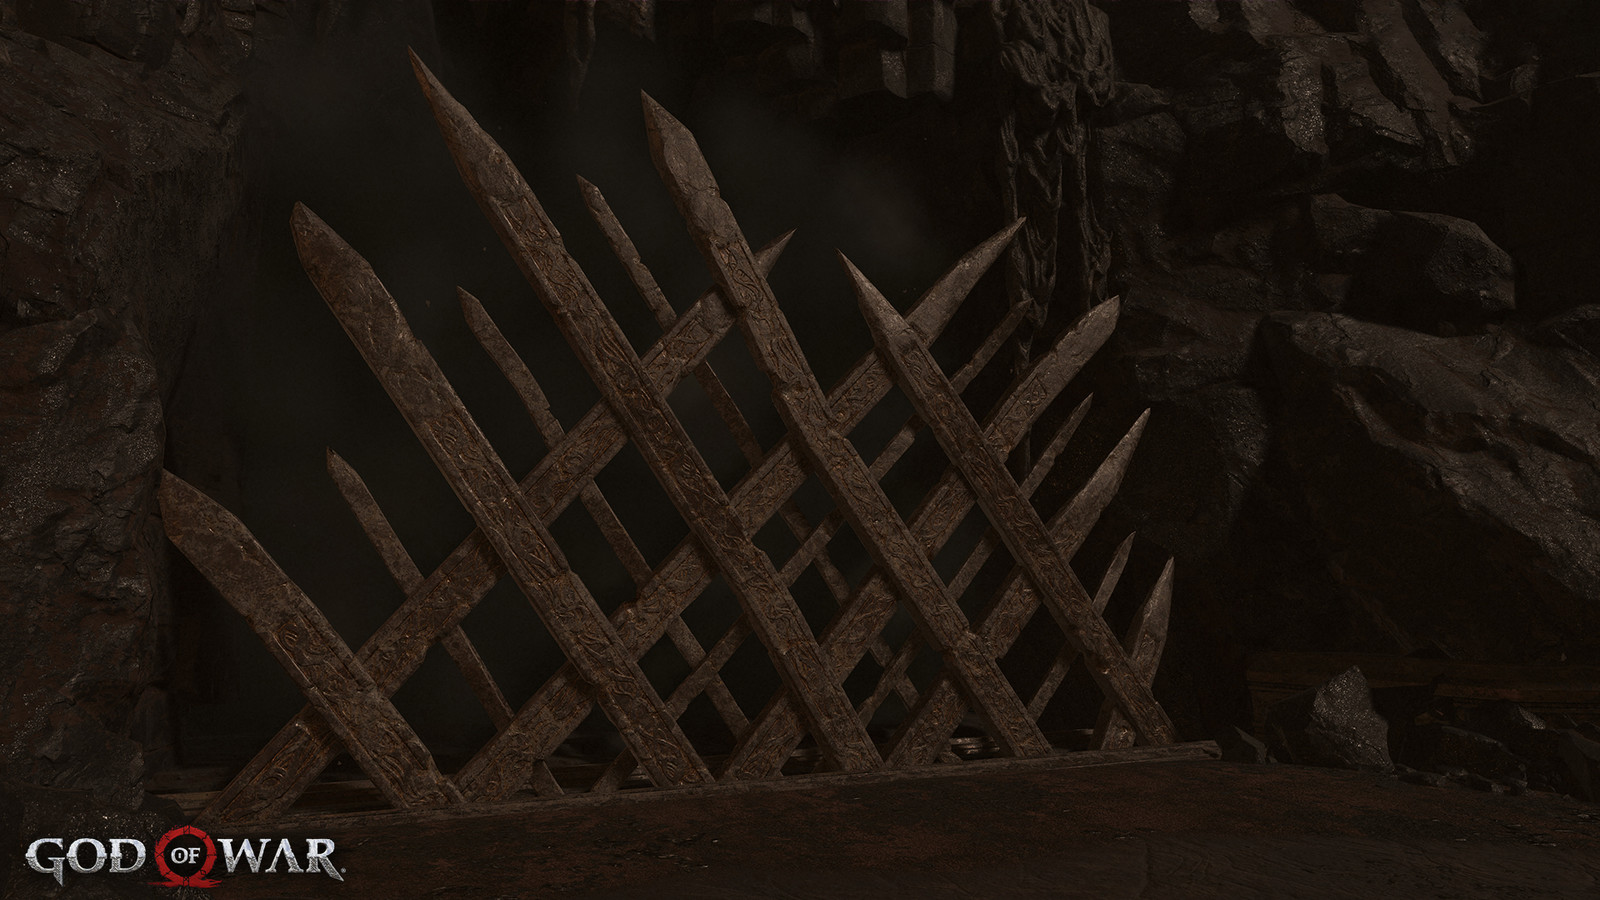 I modeled out the gate, sculpted in Zbrush, UV/bake, made the layered materials and finally placed them in-game.